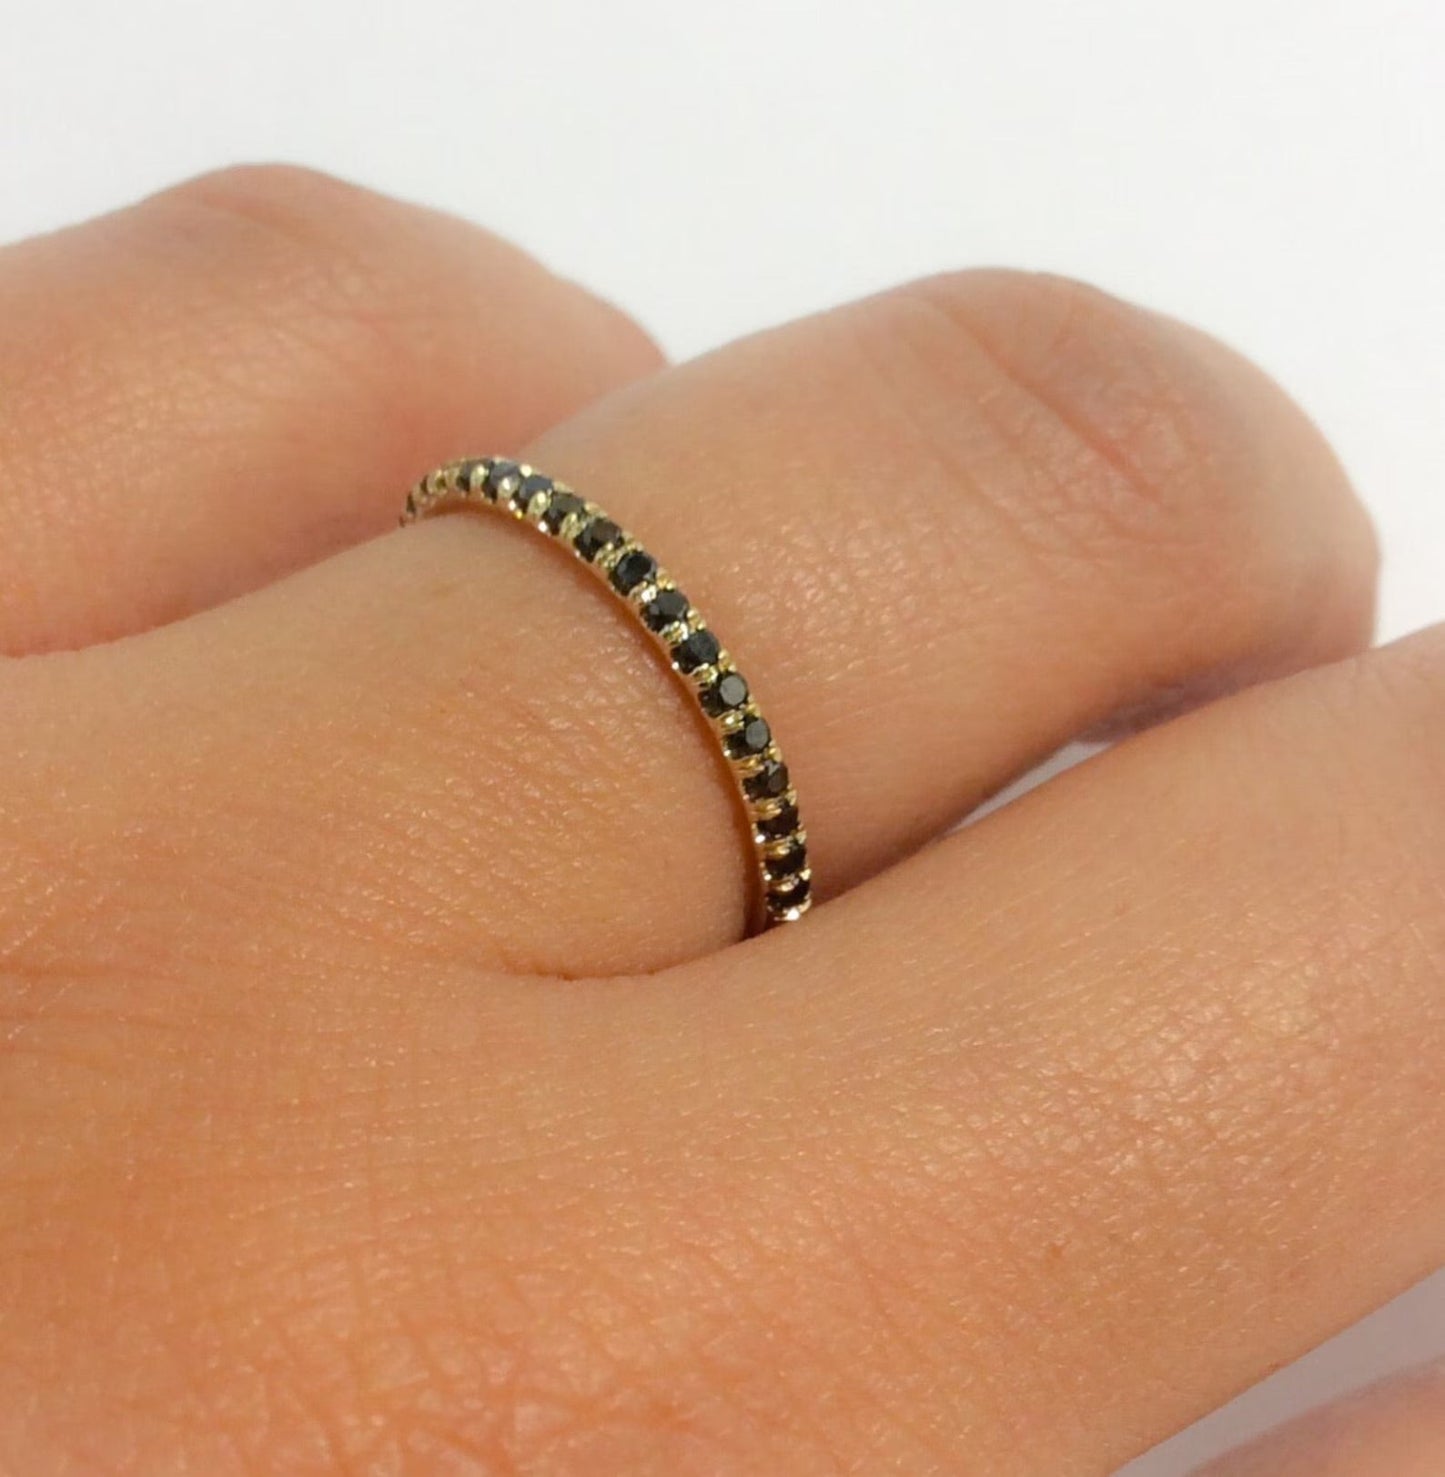 Reserved for Ana ONLY/ Size 12 Black Diamond Pave Half Eternity Ring/ 1.5mm 14K Yellow Gold Natural Black Diamond Stacking Ring